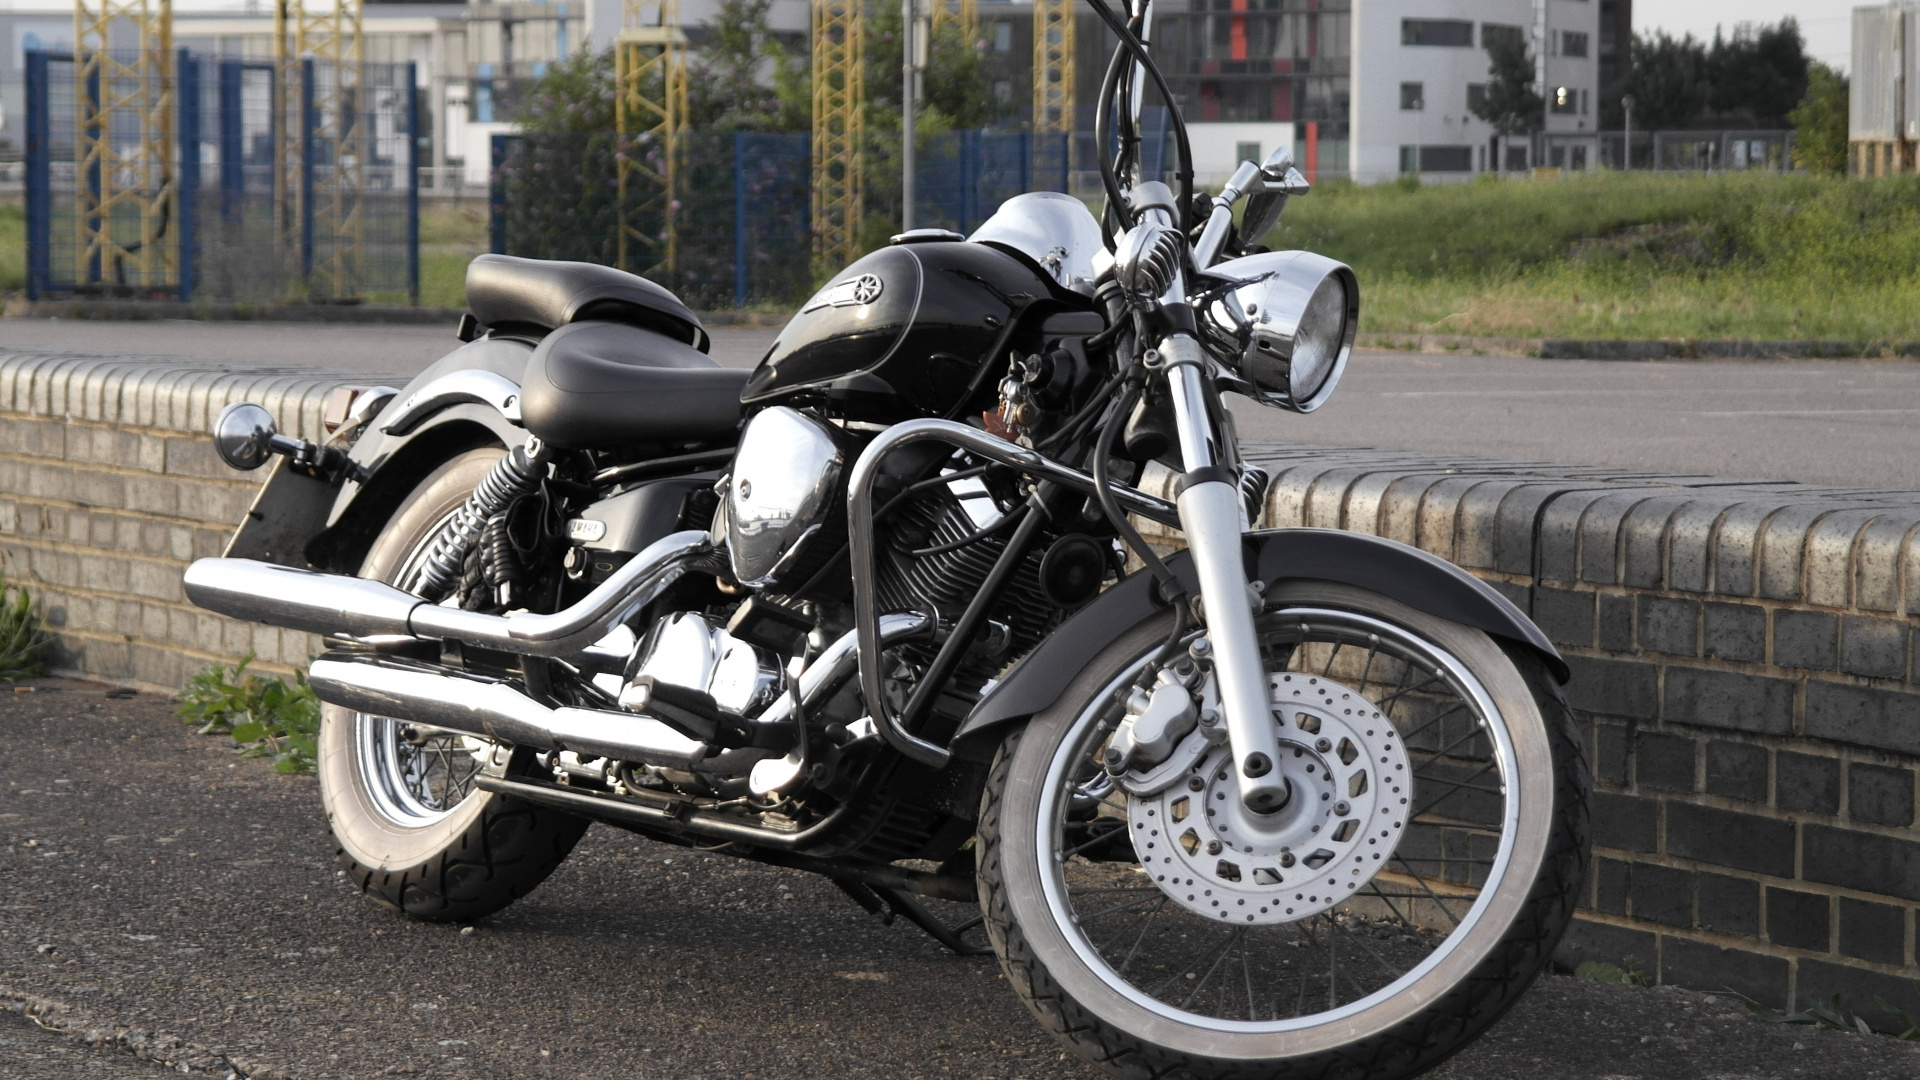 Black and Silver Cruiser Motorcycle on Road During Daytime. Wallpaper in 1920x1080 Resolution